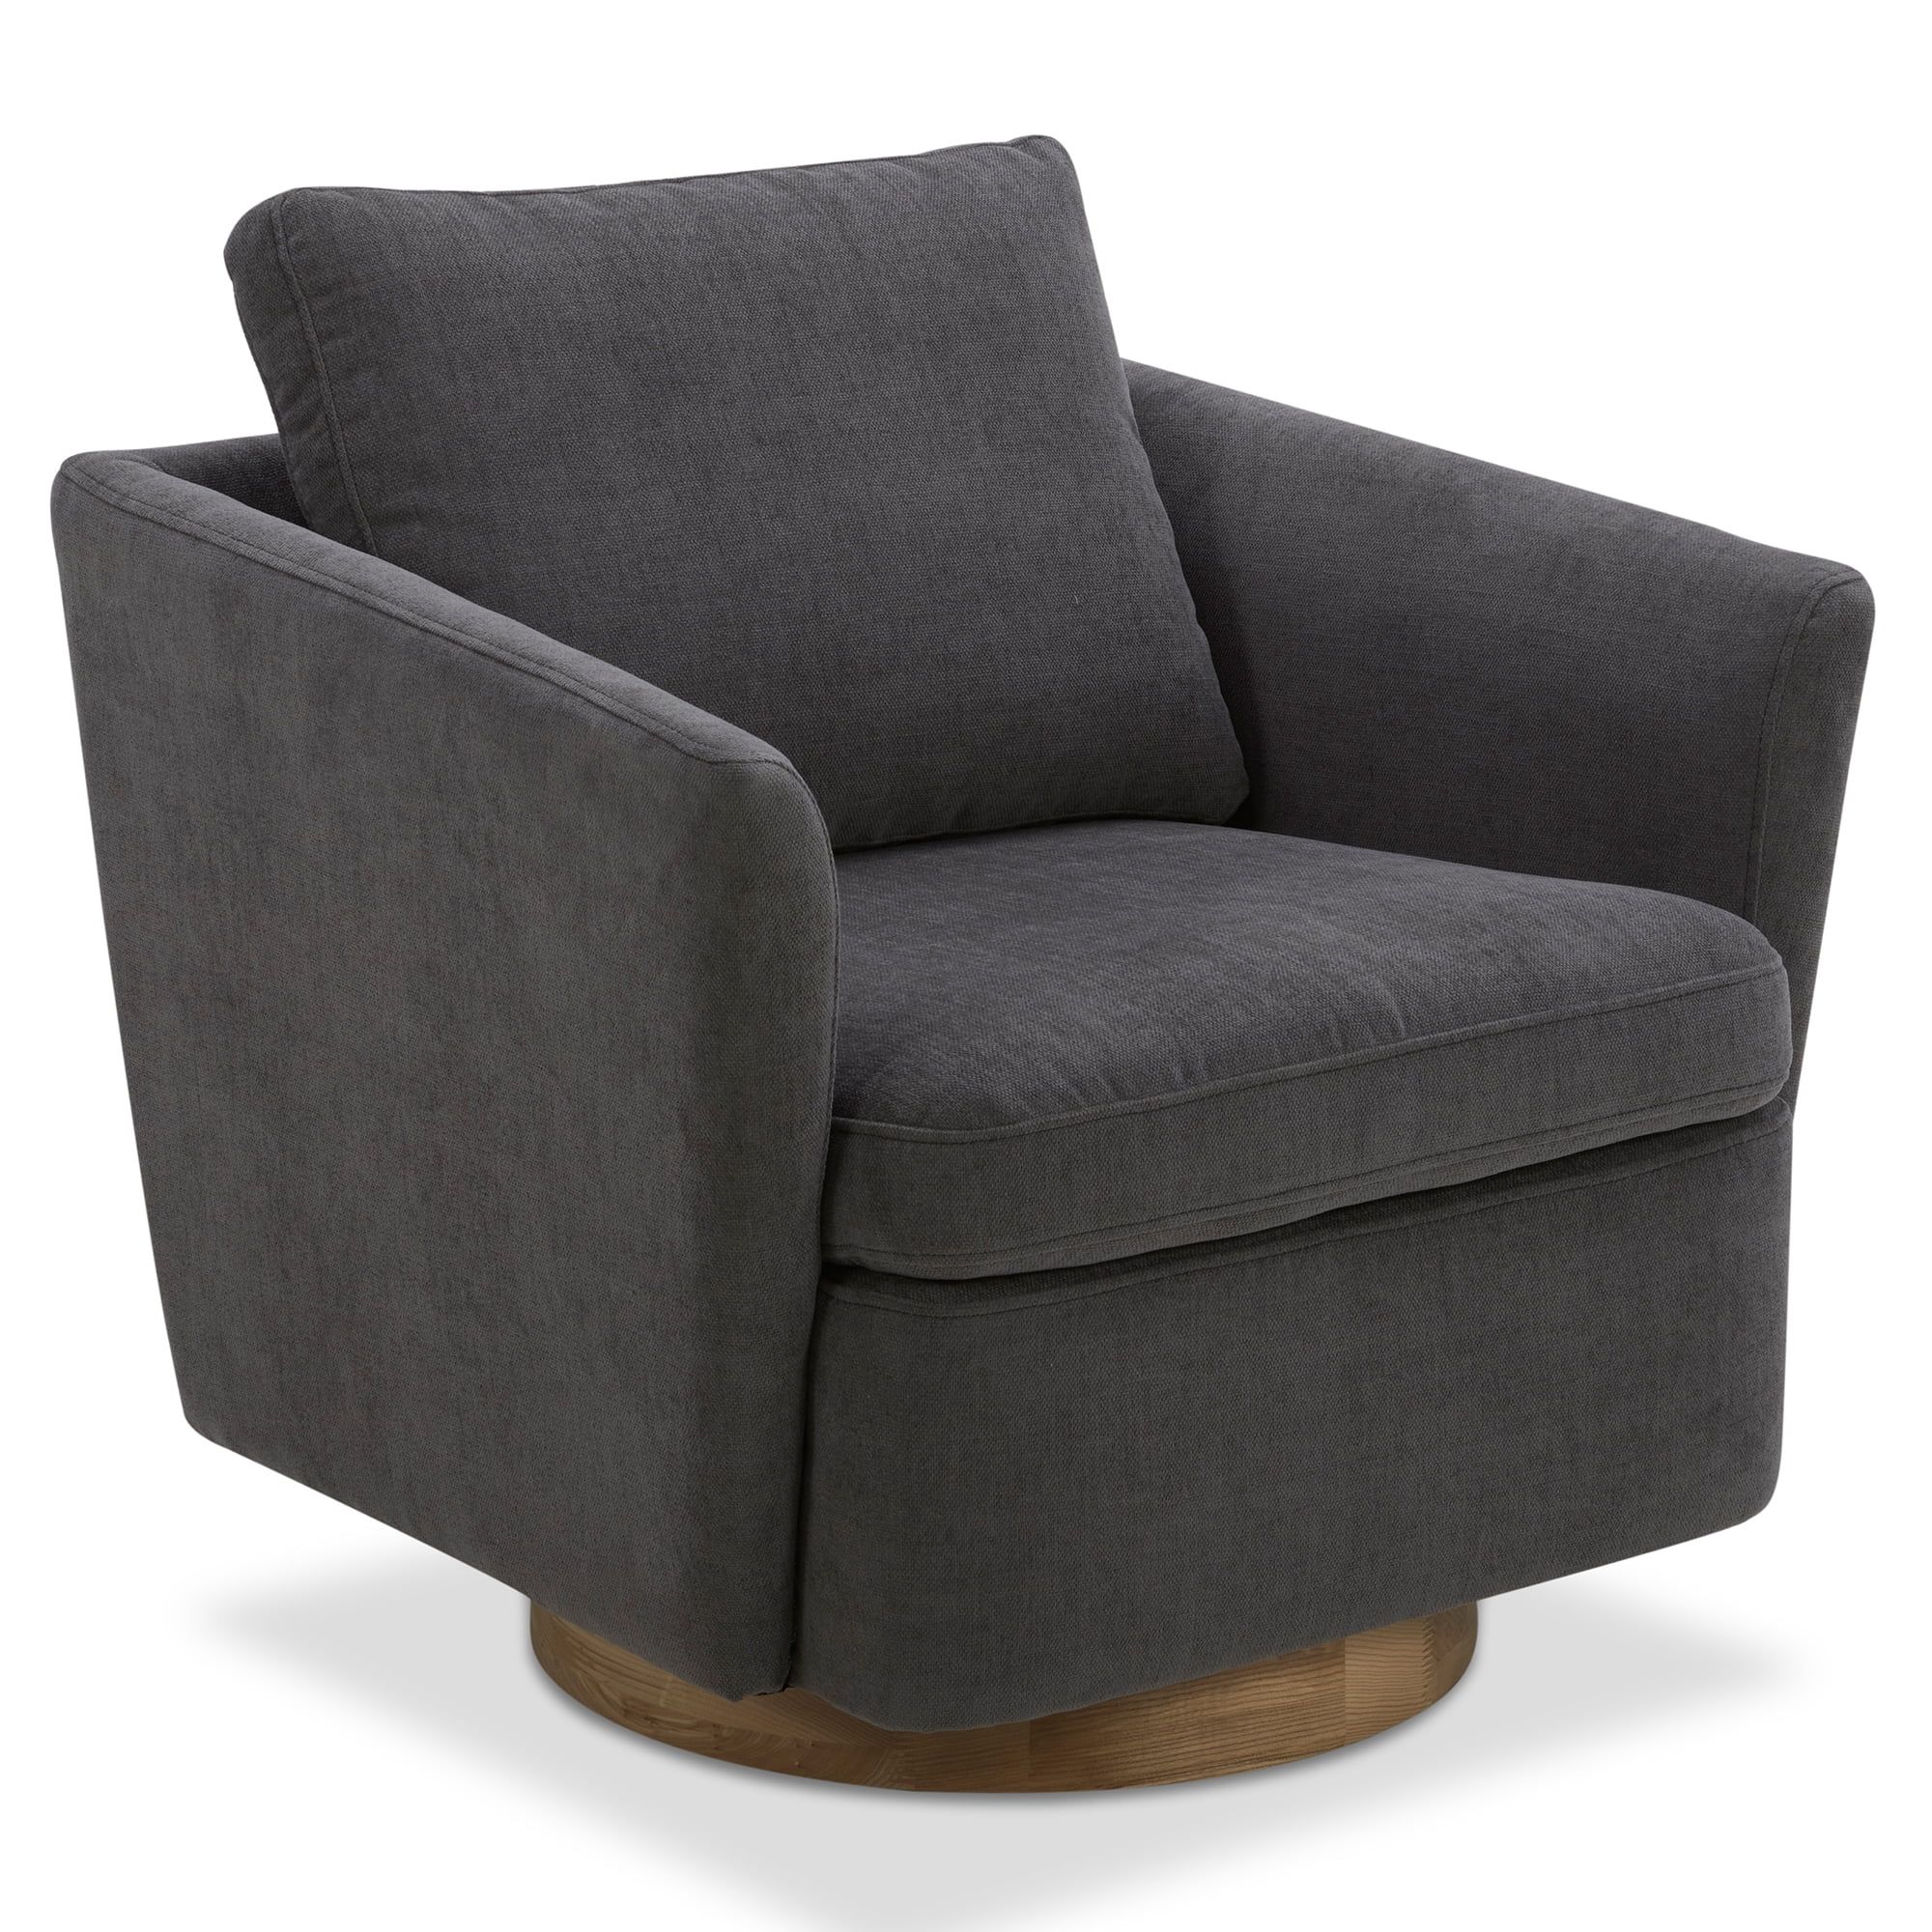 CHITA Modern Fabric Swivel Accent Chairs with Foam Cushion&Wood Base,Living Room Armchairs for Sm... | Walmart (US)